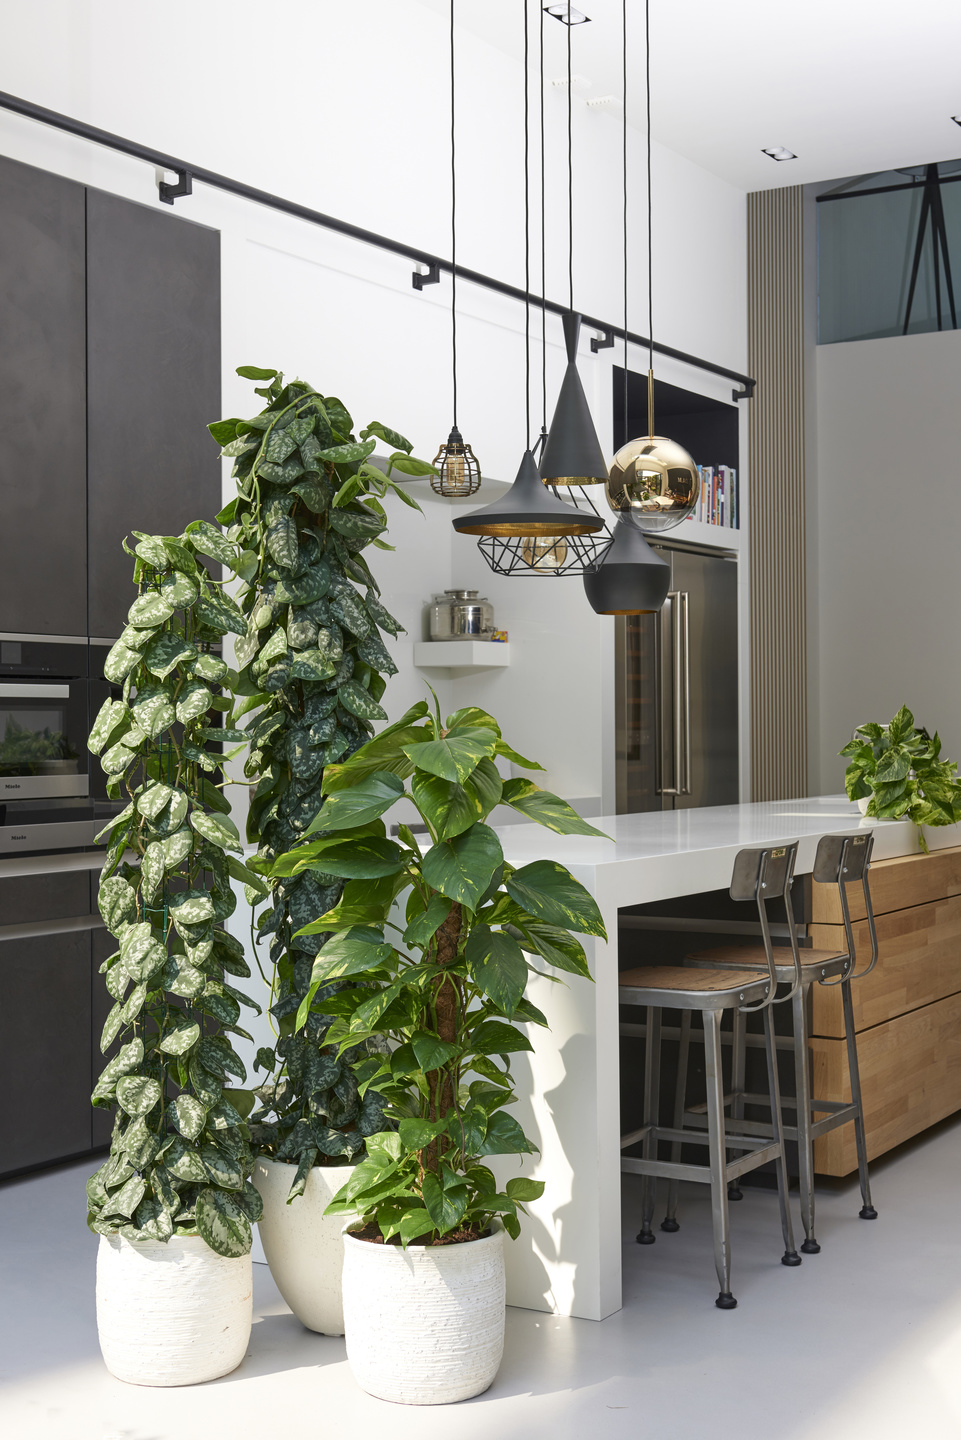 Different colored pothos adding life to a white kitchen space